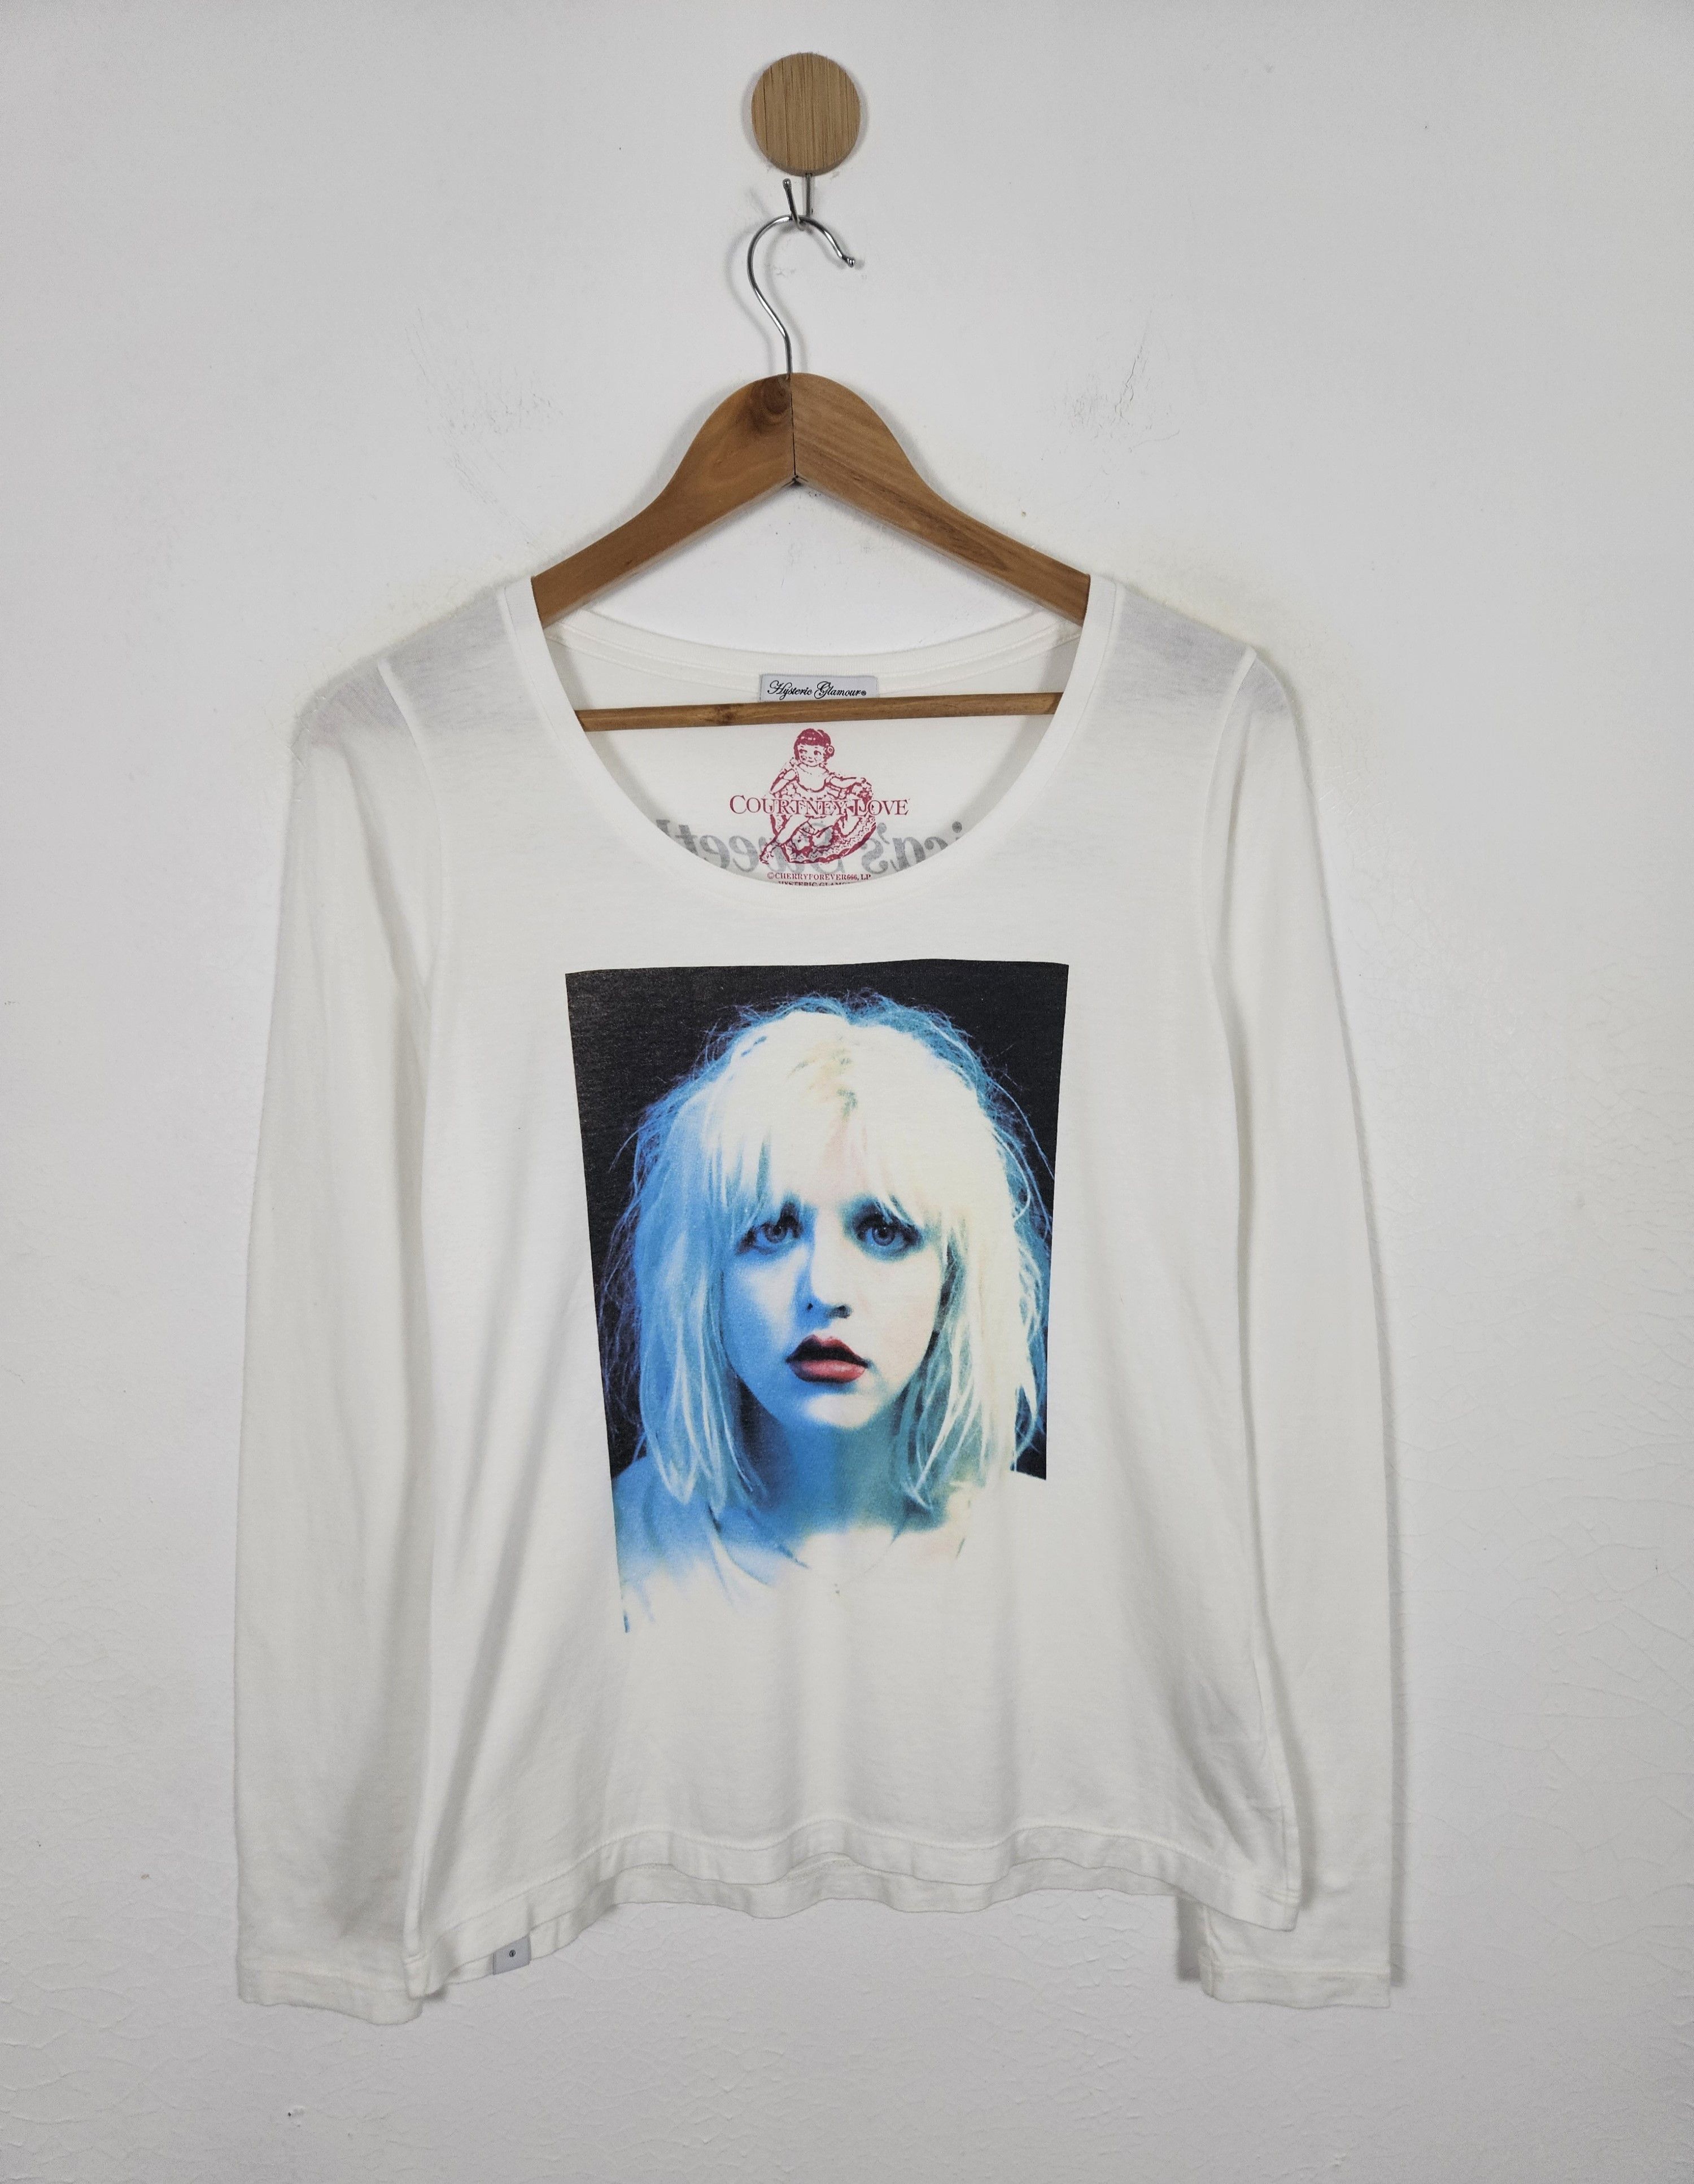 Hysteric Glamour Courtney Love Hole American Sweetheart tee - 1